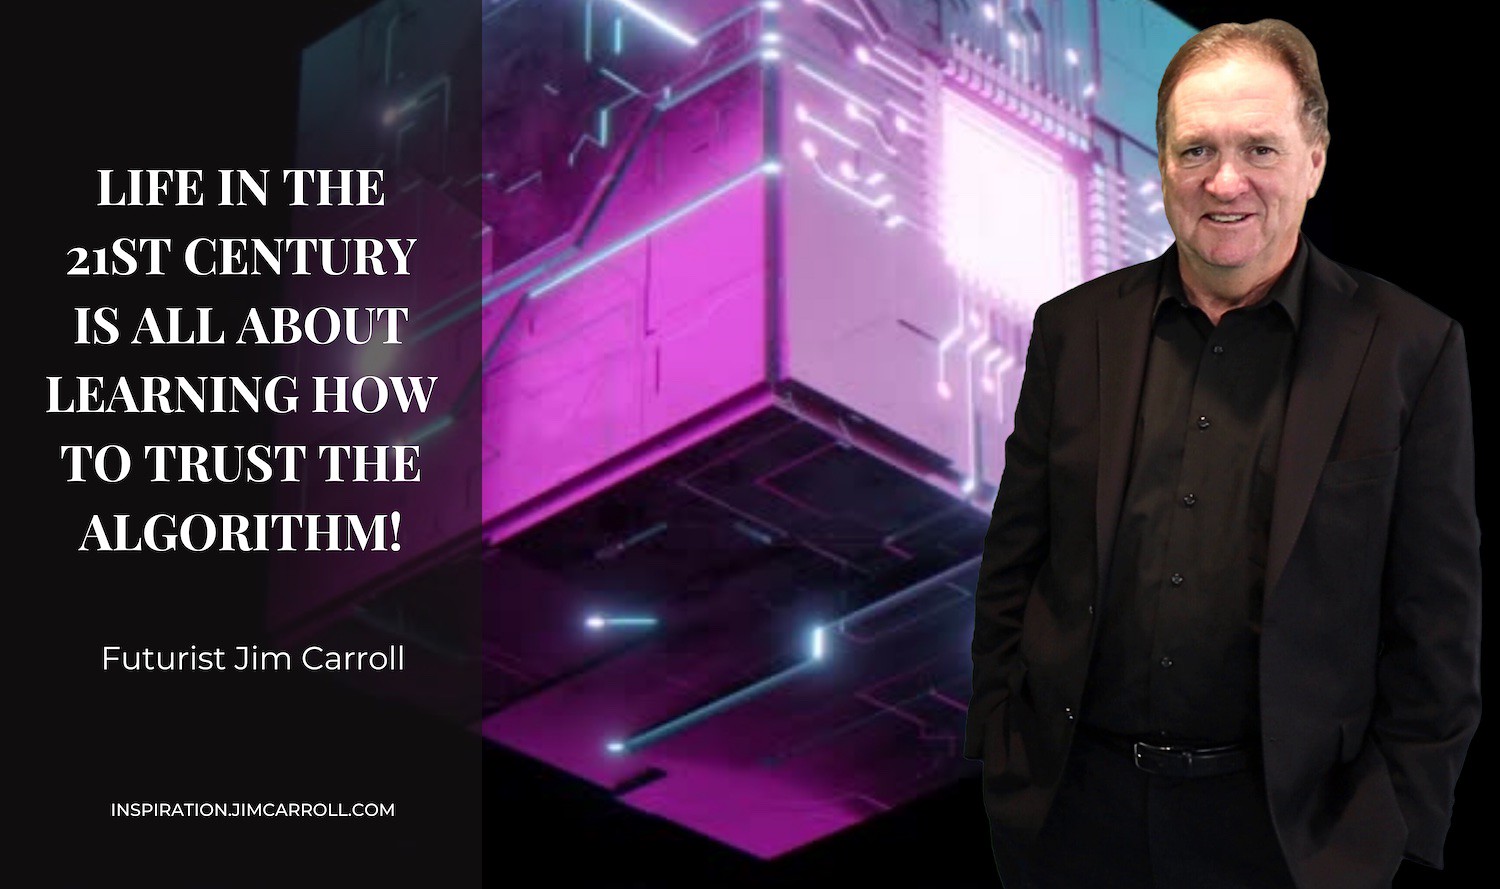 "Life in the 21st century is all about learning how to trust the algorithm!" - Futurist Jim Carroll